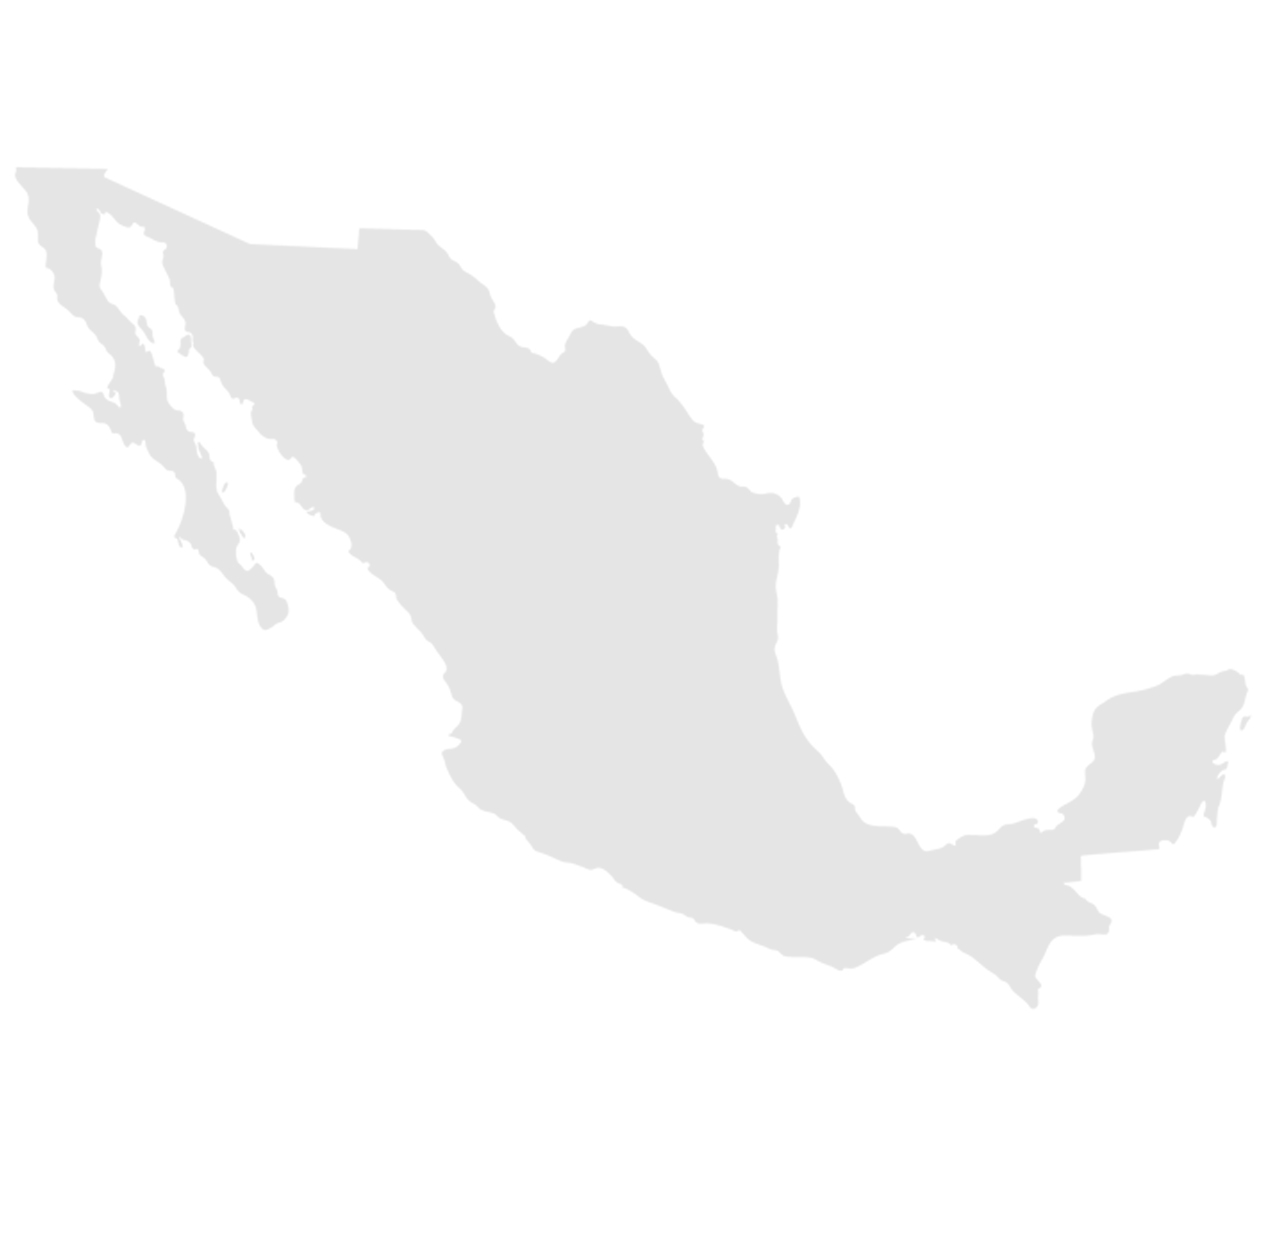 Gray map of Mexico